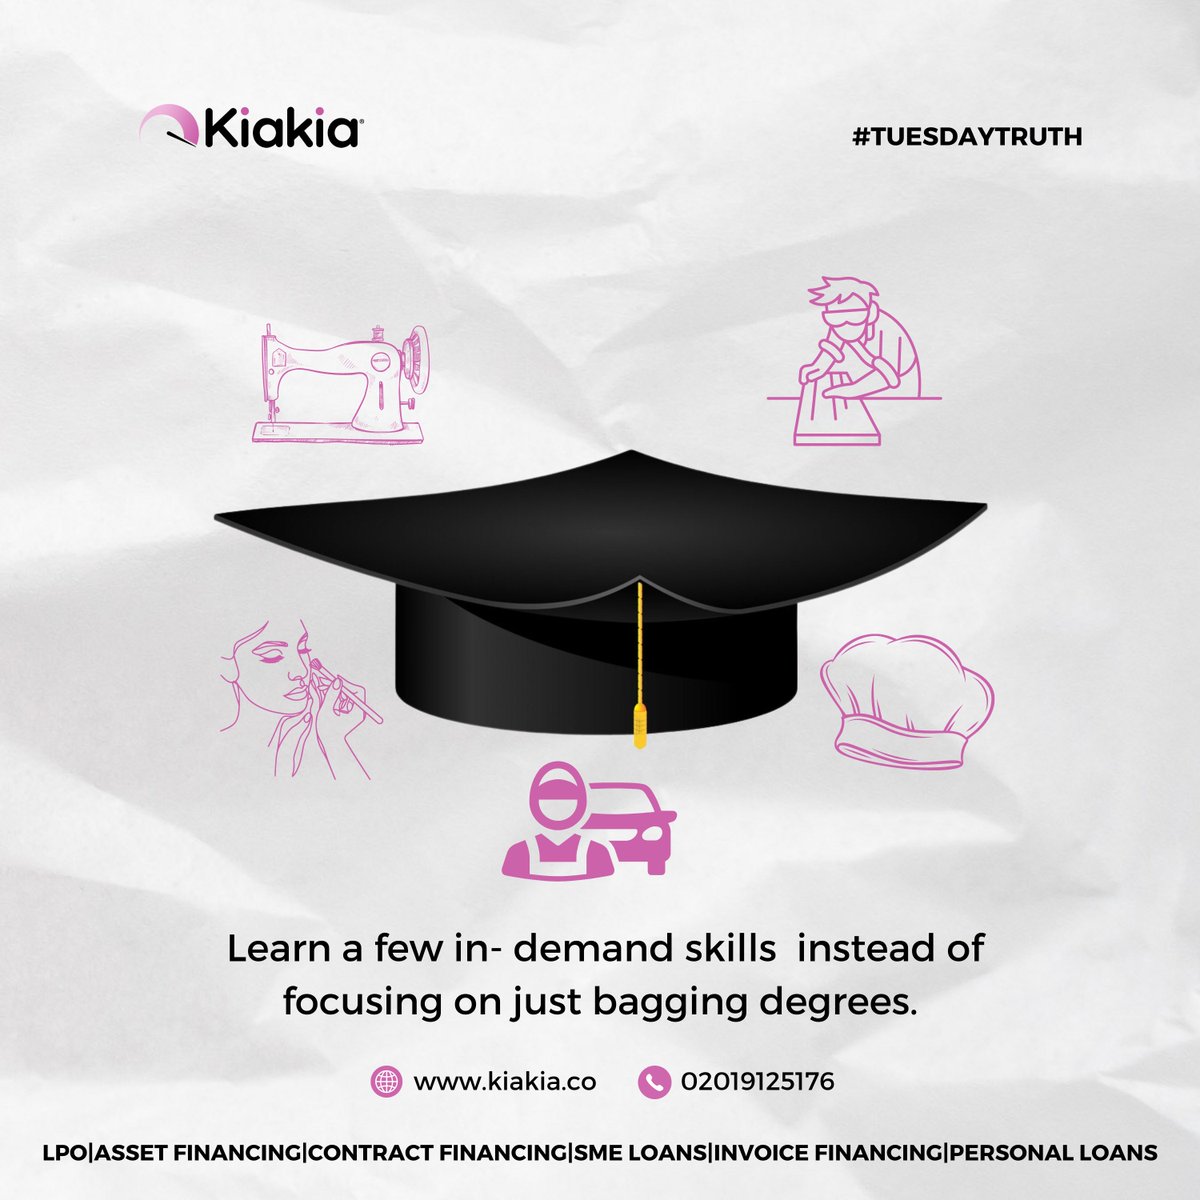 Don't just chase diplomas, chase skills that make you indispensable. That's the real currency of success.

 #TuesdayTruth #kiakiatuesday #skills